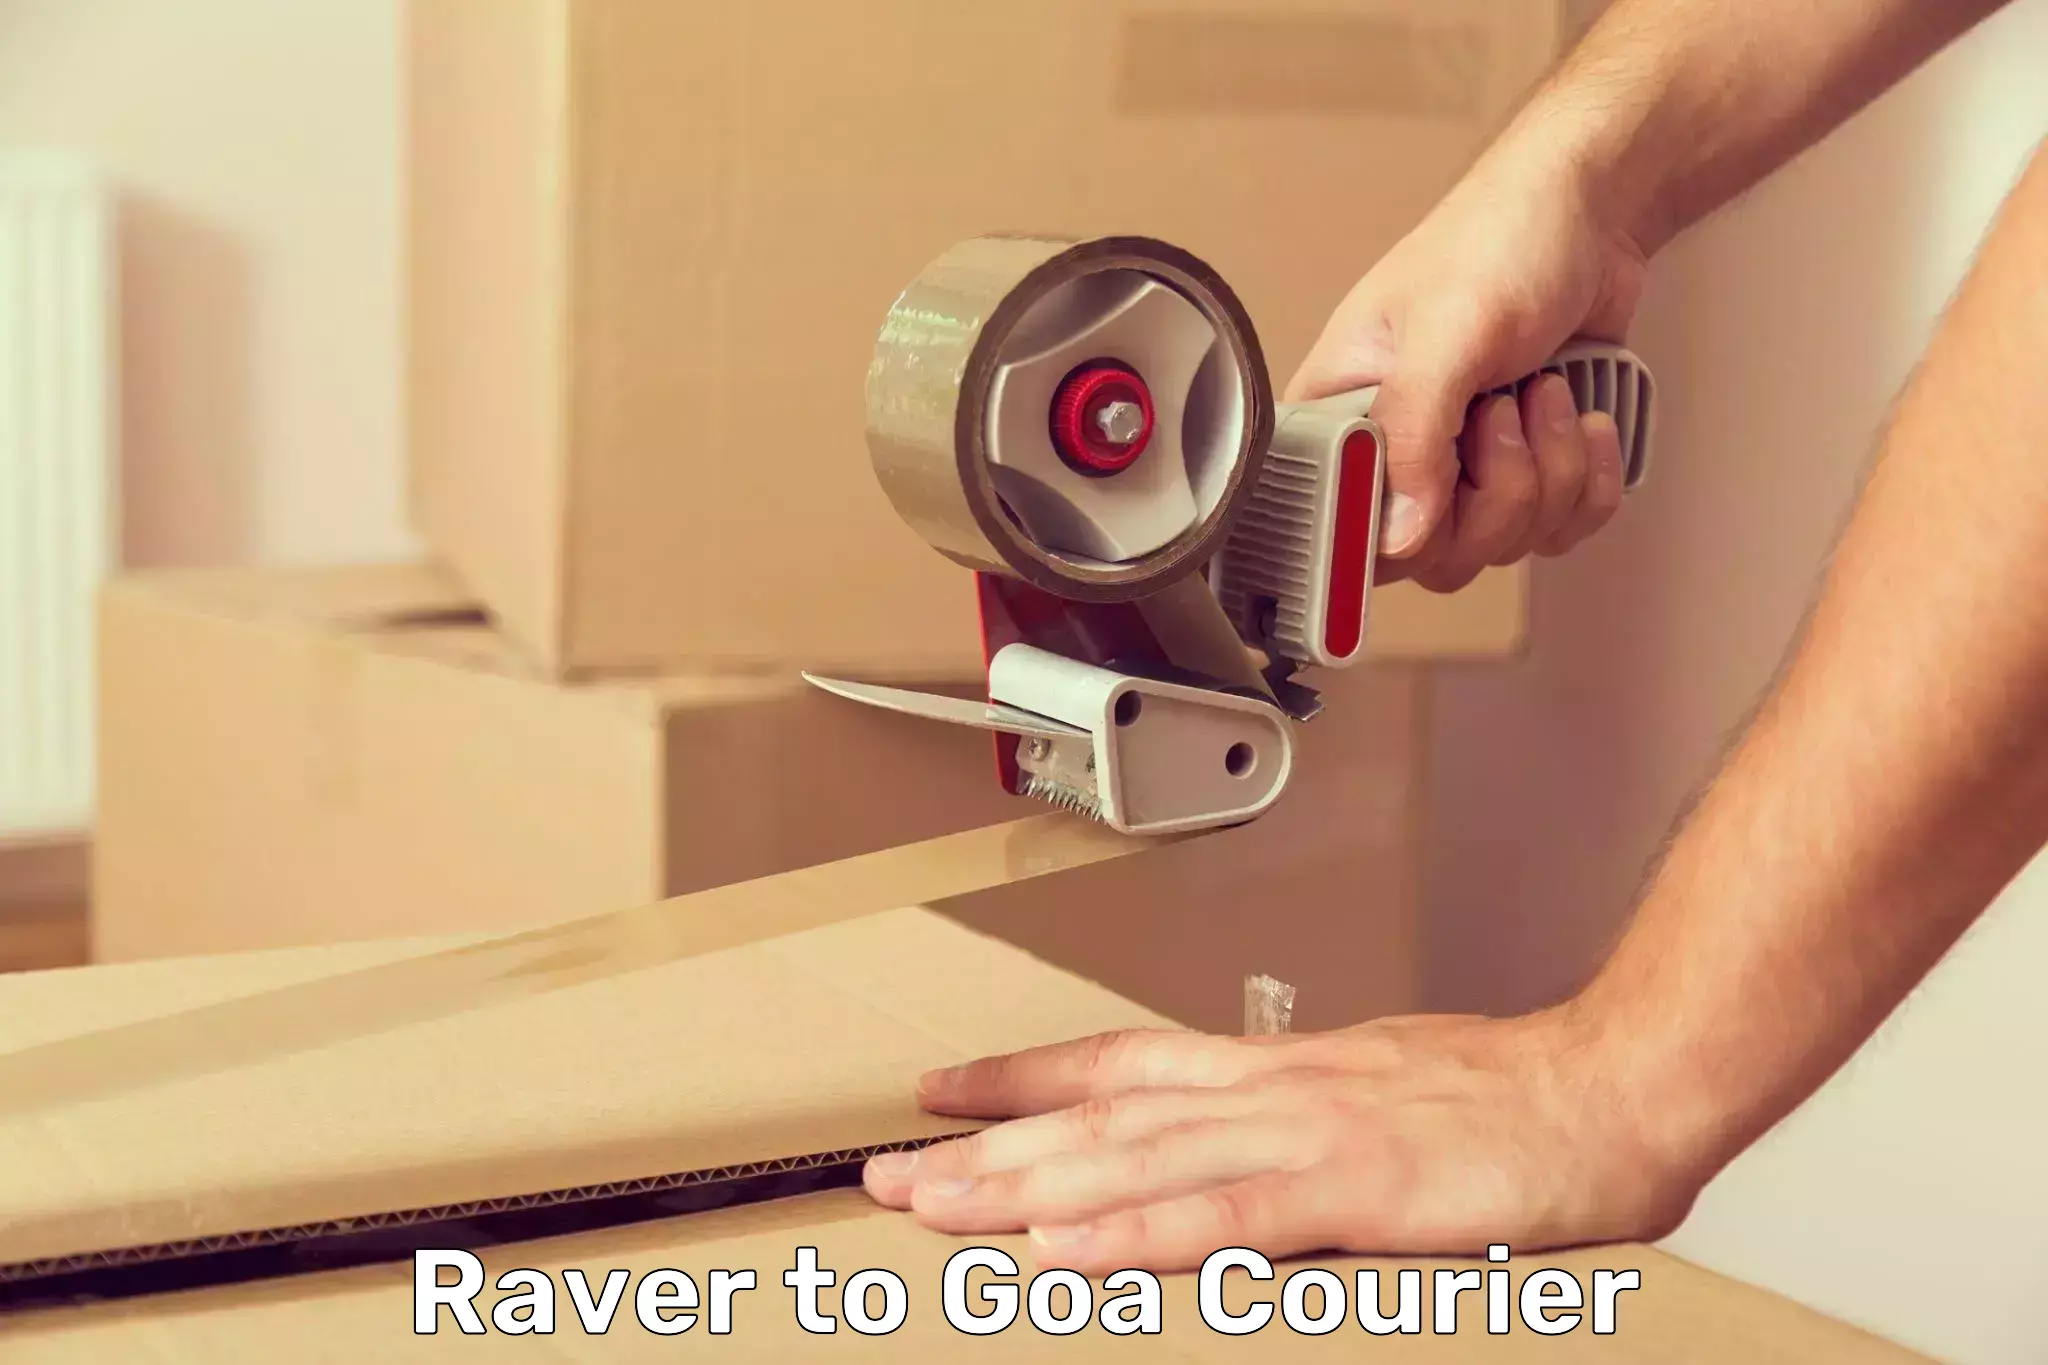 Global courier networks Raver to Goa